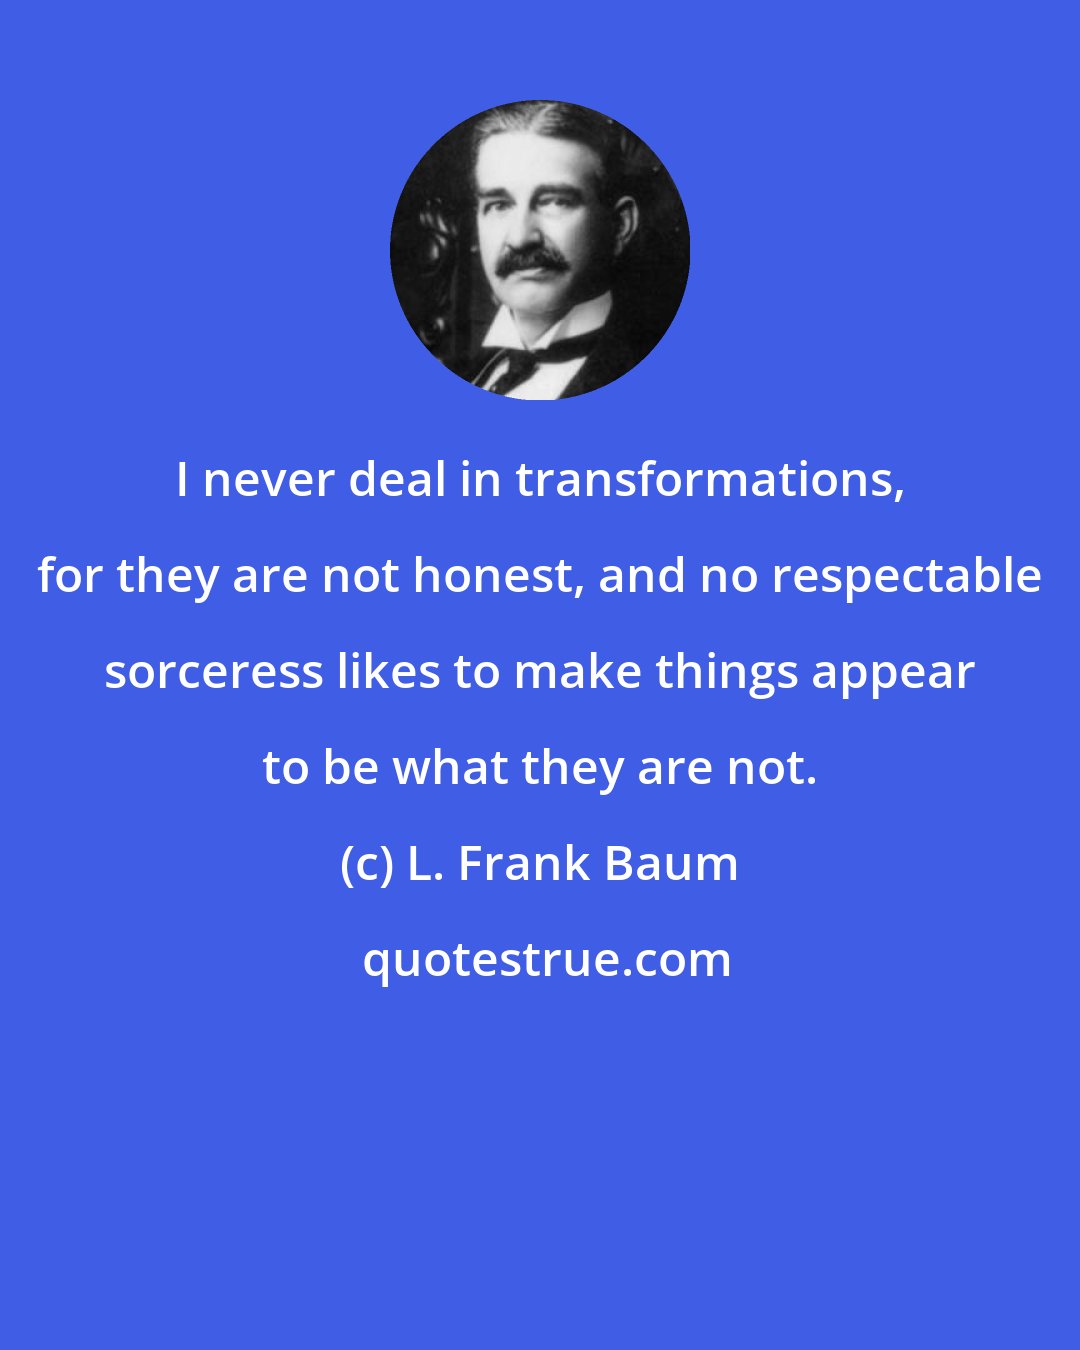 L. Frank Baum: I never deal in transformations, for they are not honest, and no respectable sorceress likes to make things appear to be what they are not.